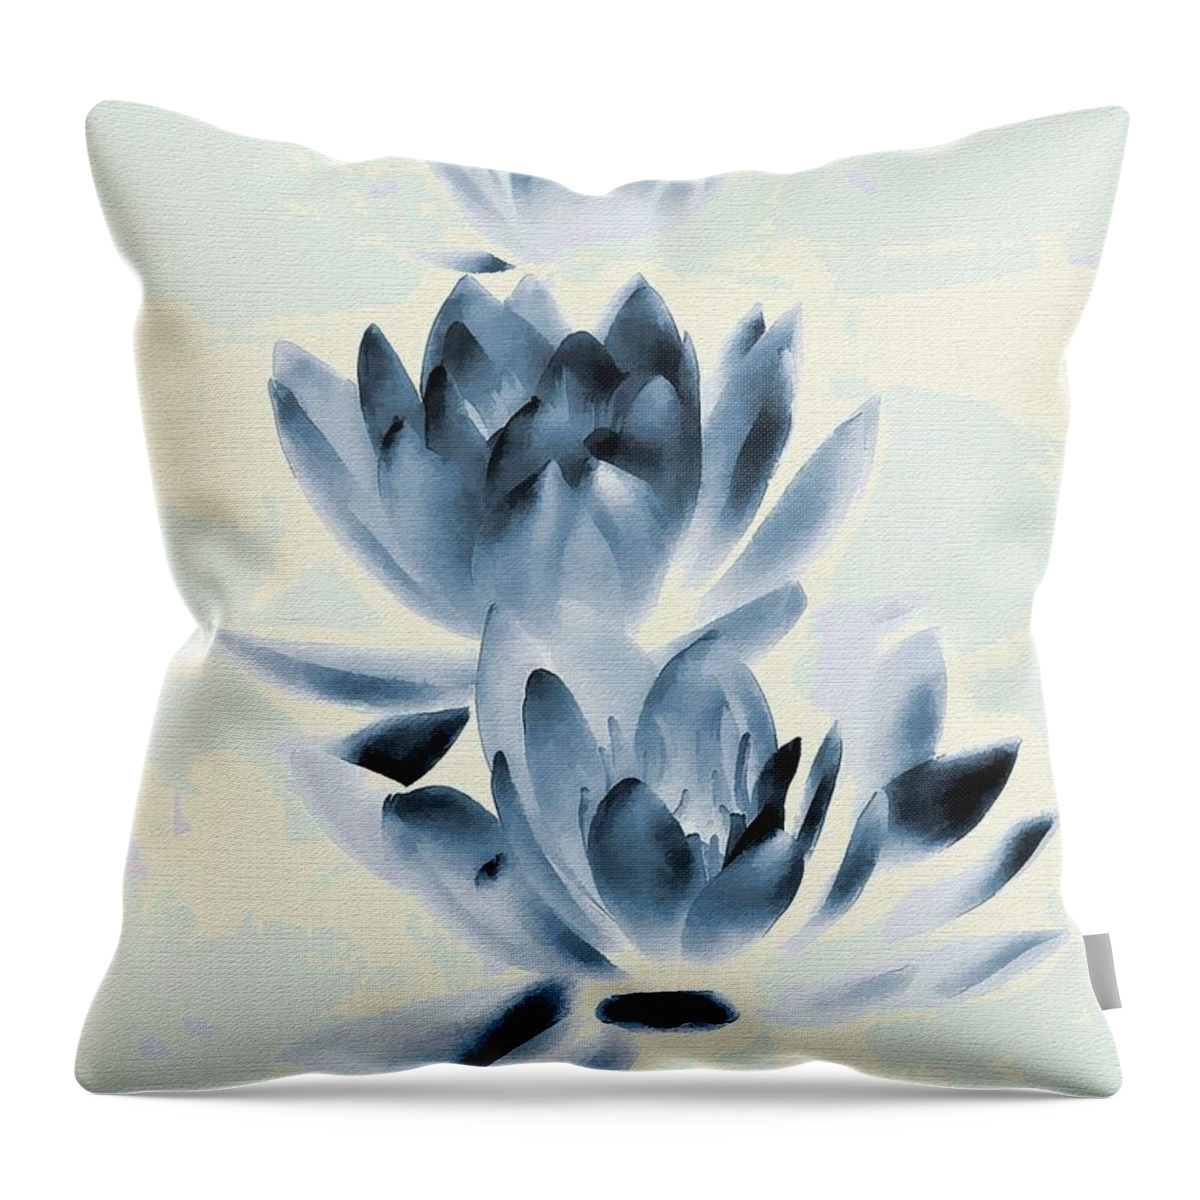 Water Throw Pillow featuring the photograph Study in Blue by Andrea Kollo